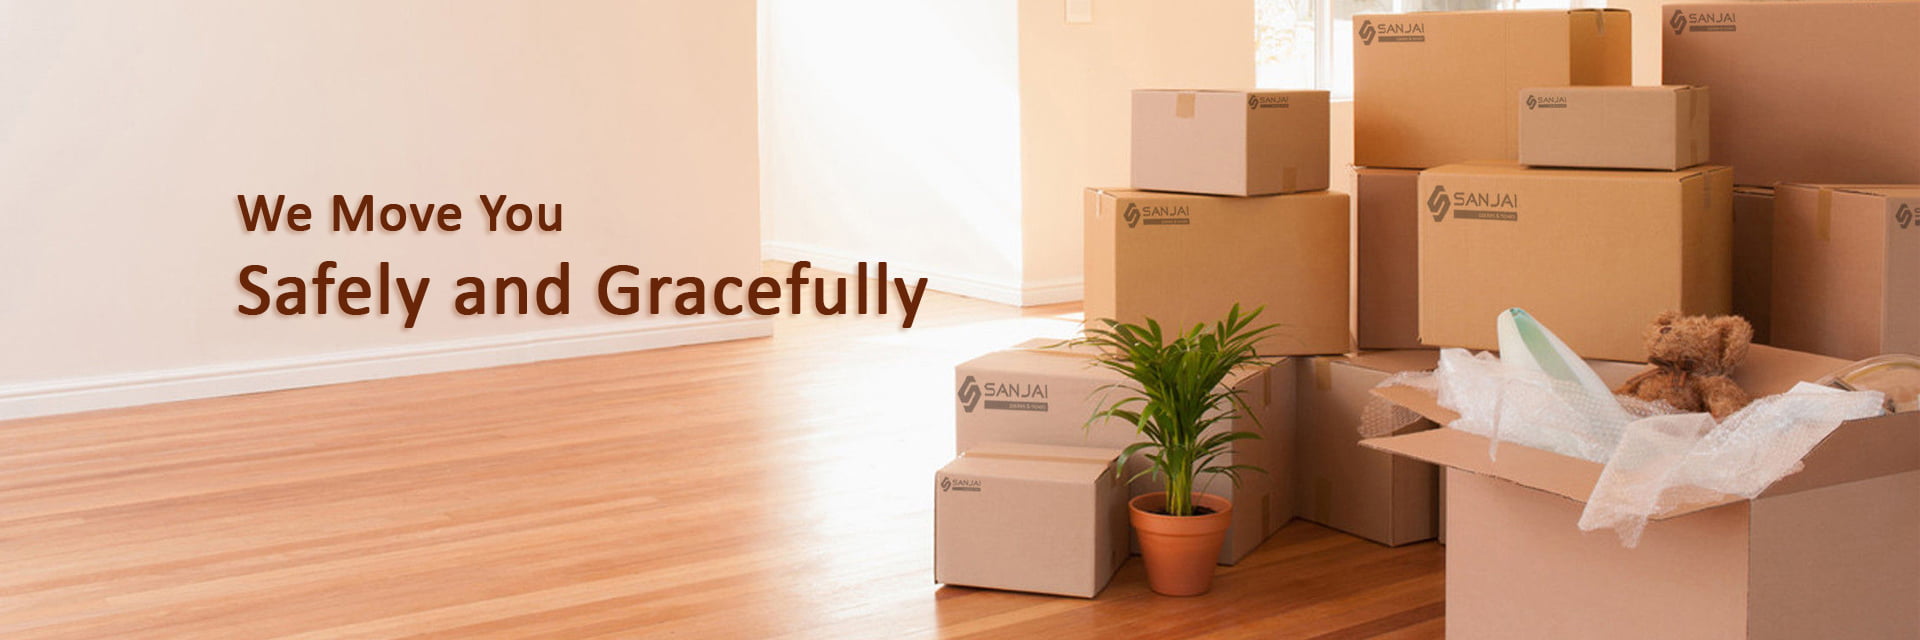 Aryan Packers and Movers House Shifting Services in Hyderabad